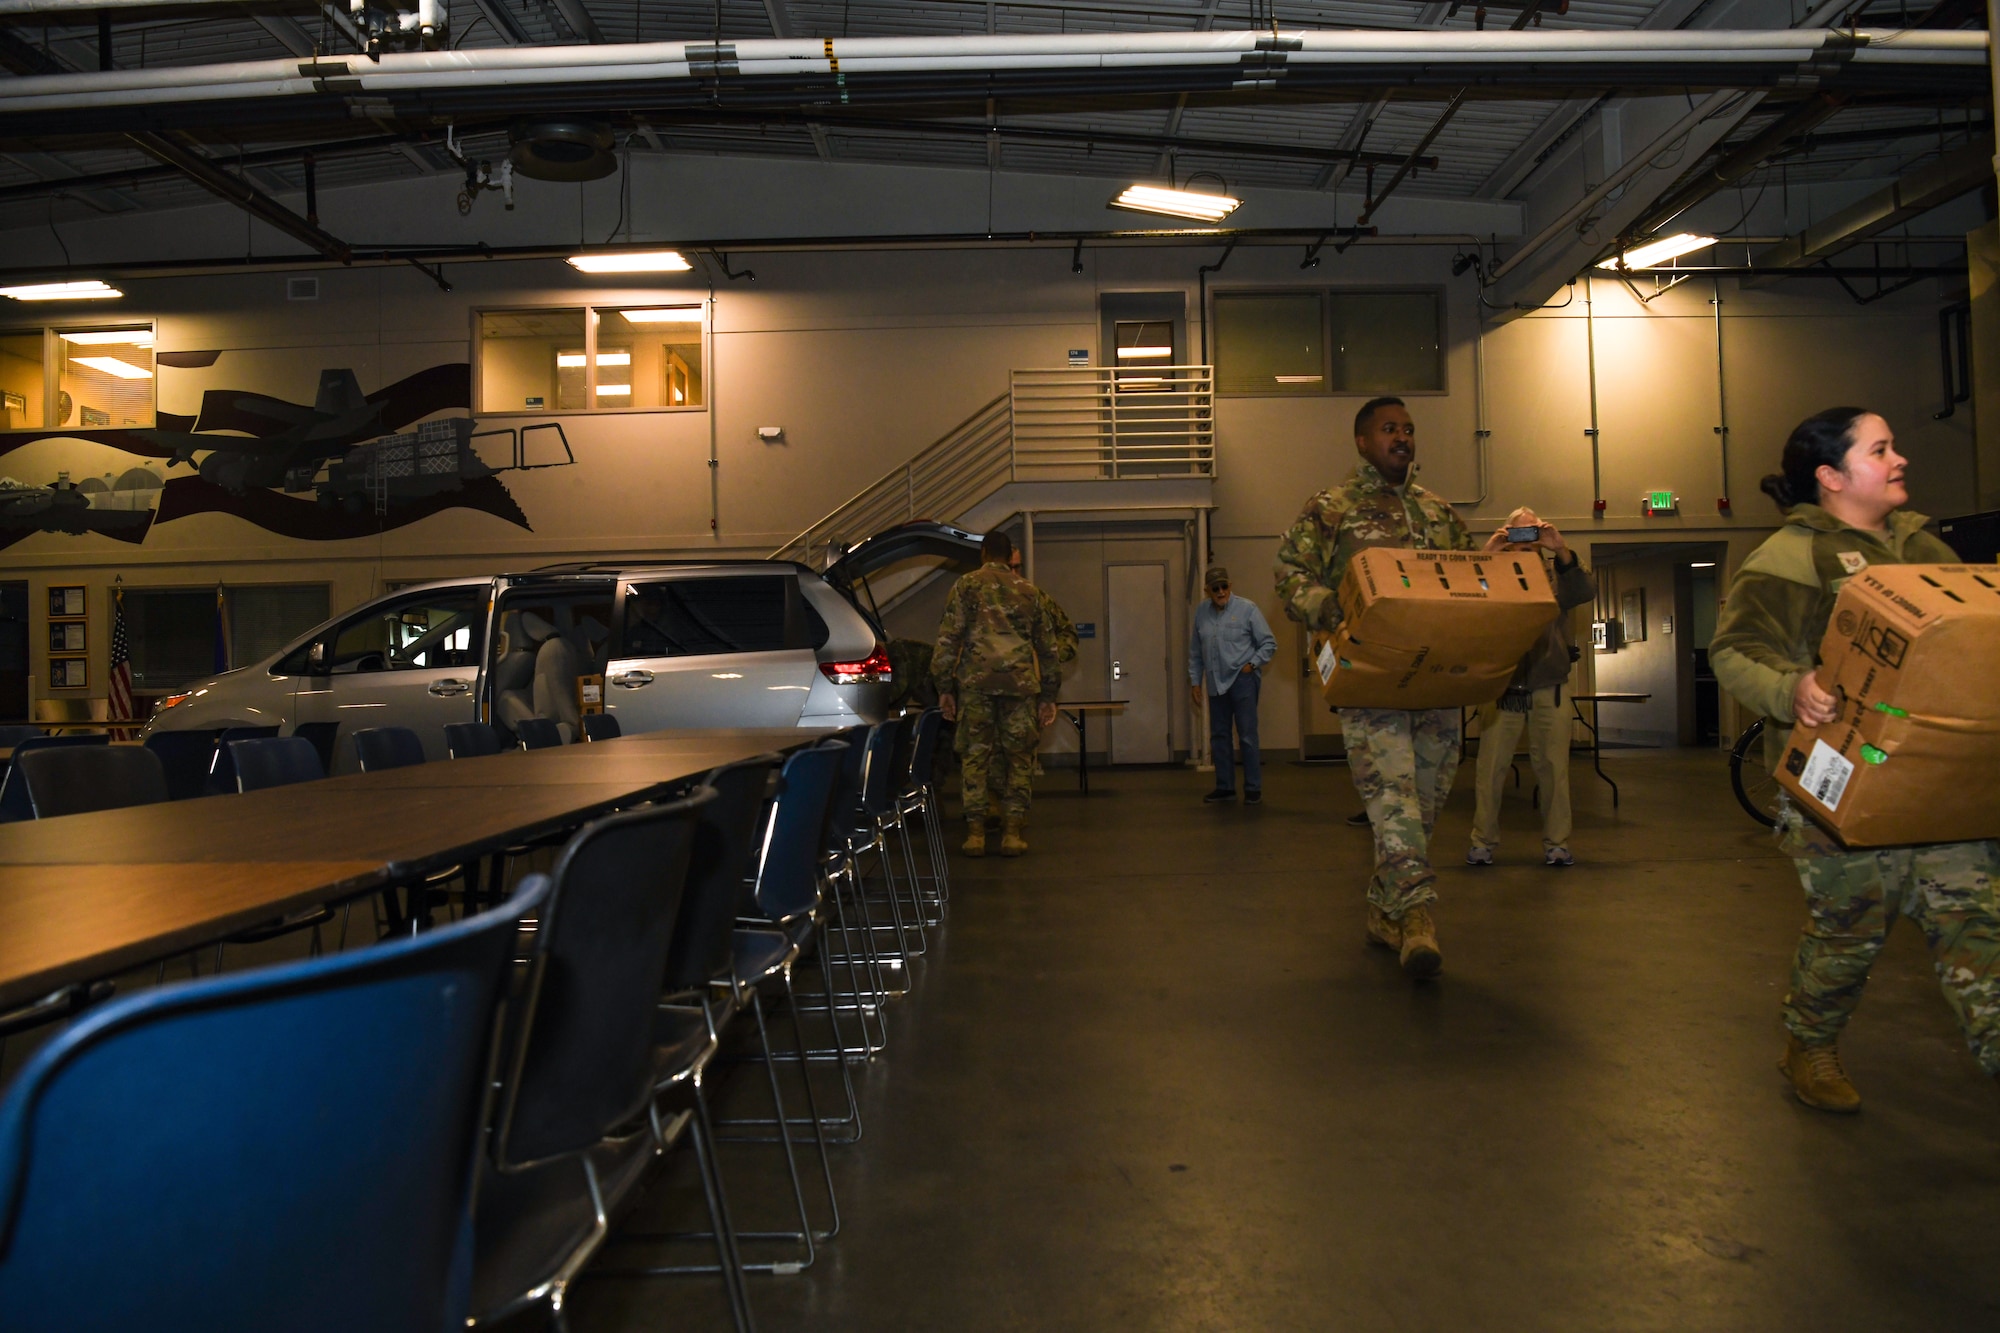 Airmen carry boxes of frozen turkeys in a warehouse during a community relations event.